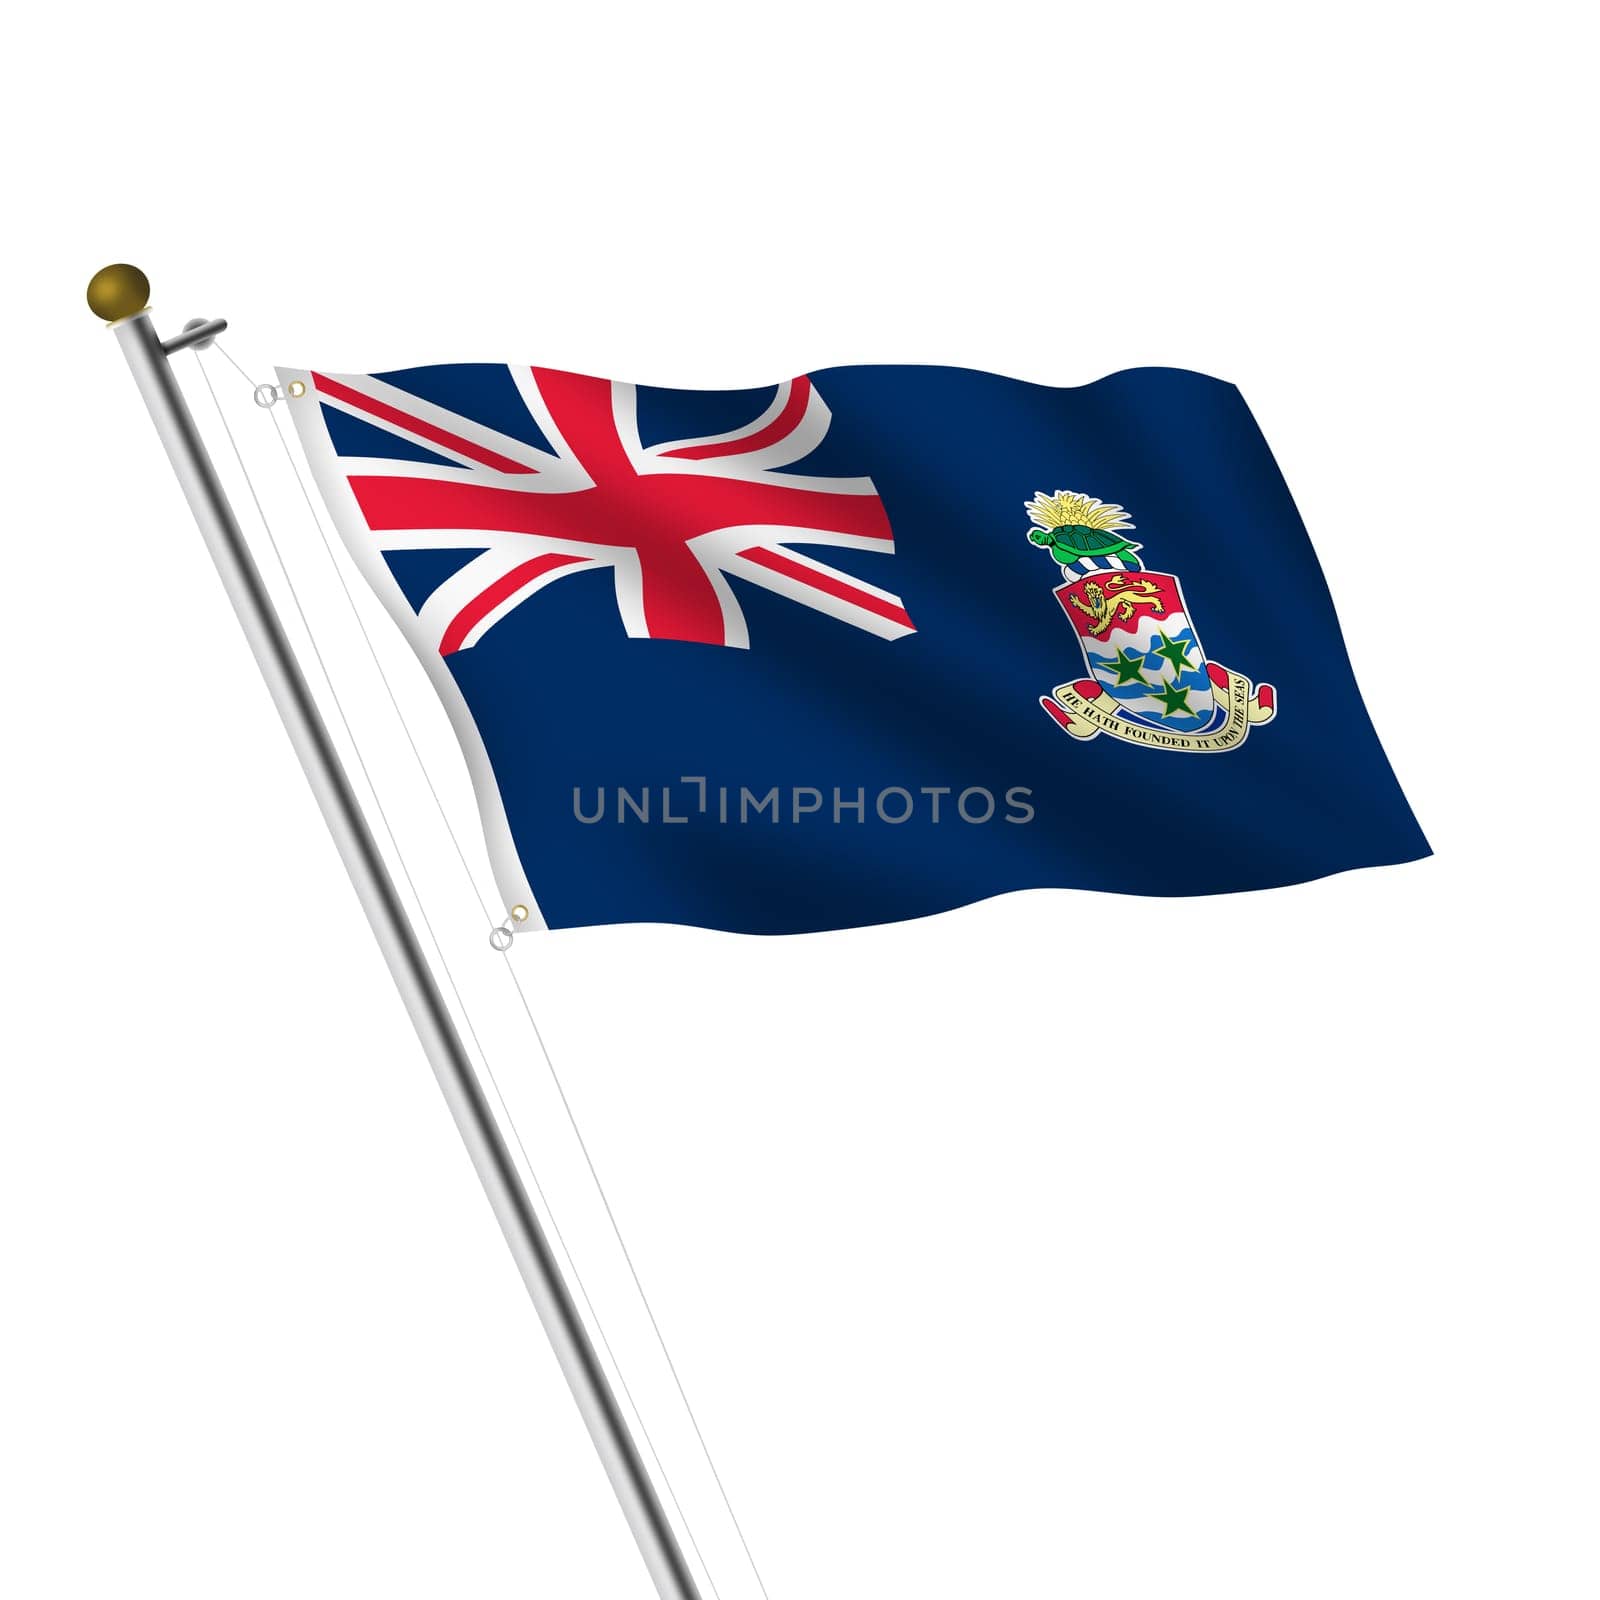 A Cayman Islands Flagpole 3d illustration on white with clipping path by VivacityImages